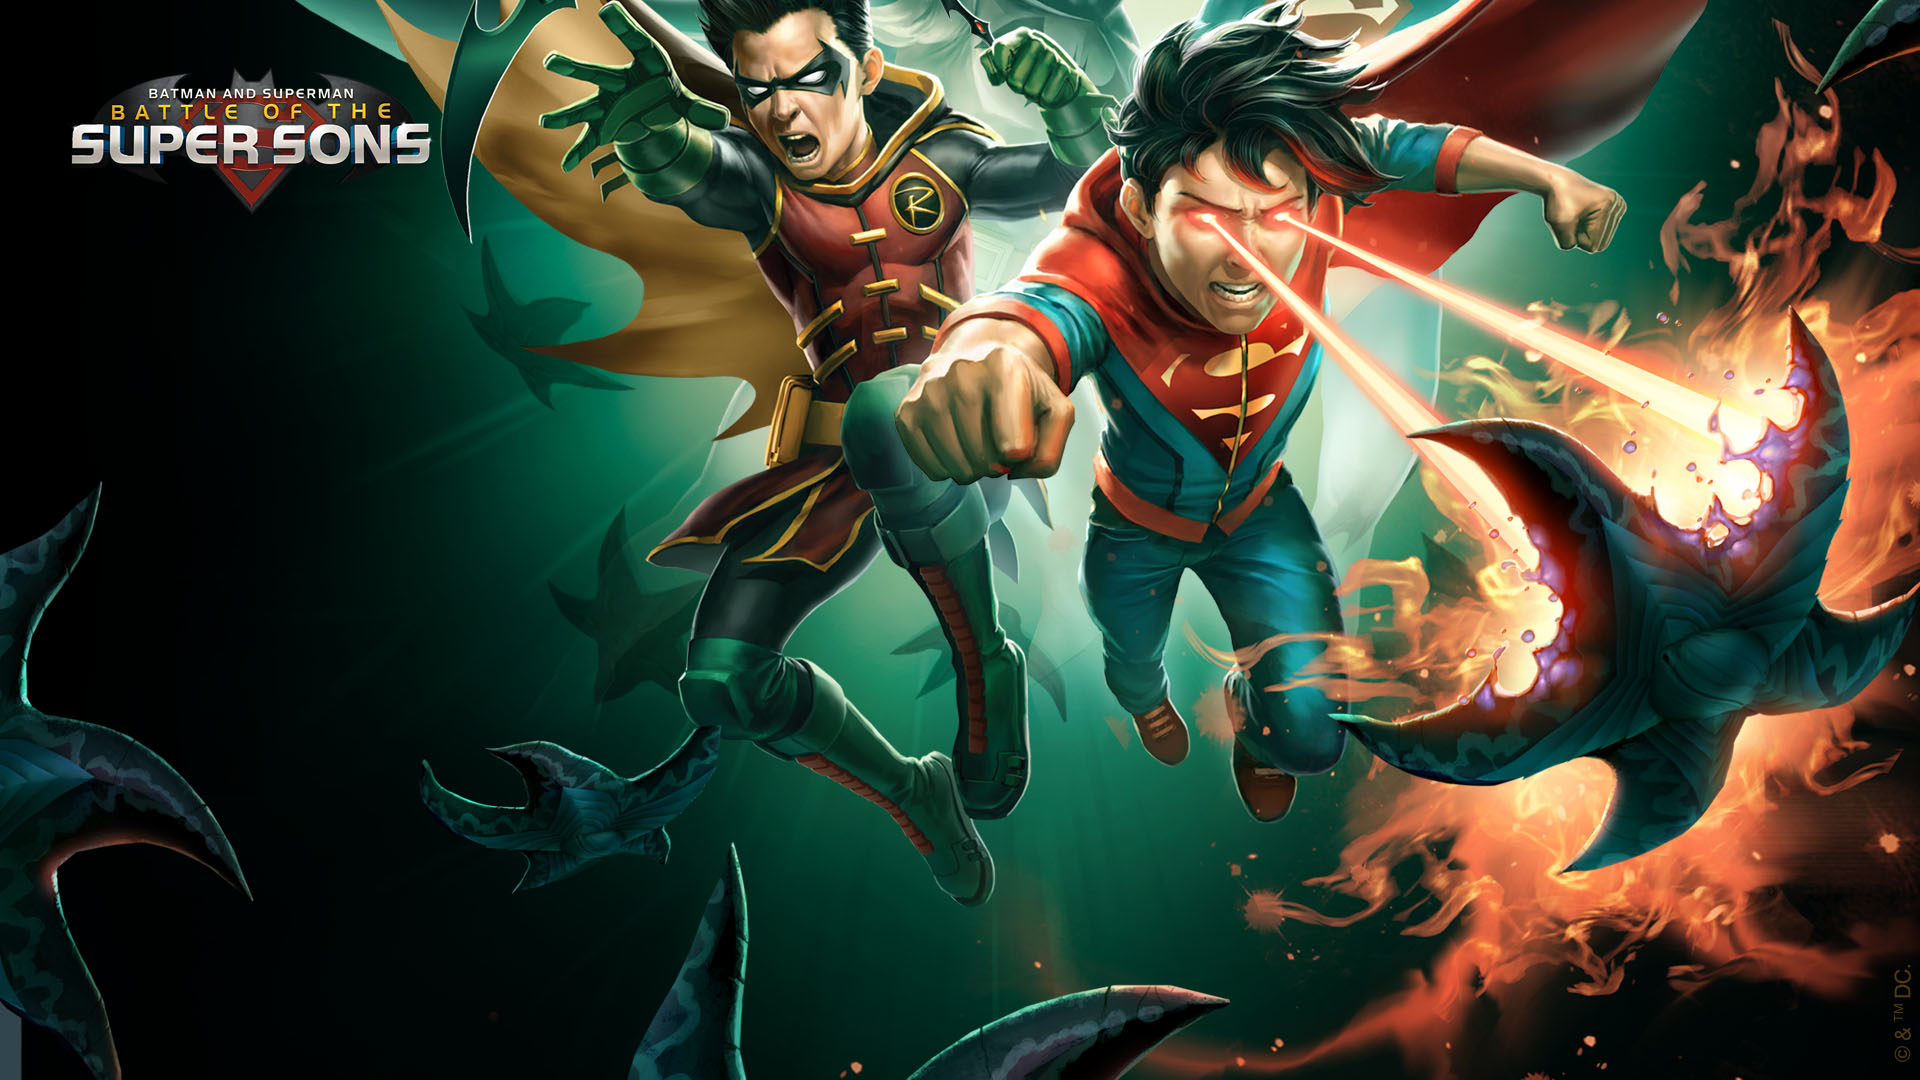 Friendship and Family Lie at the Heart of Battle of the Super Sons